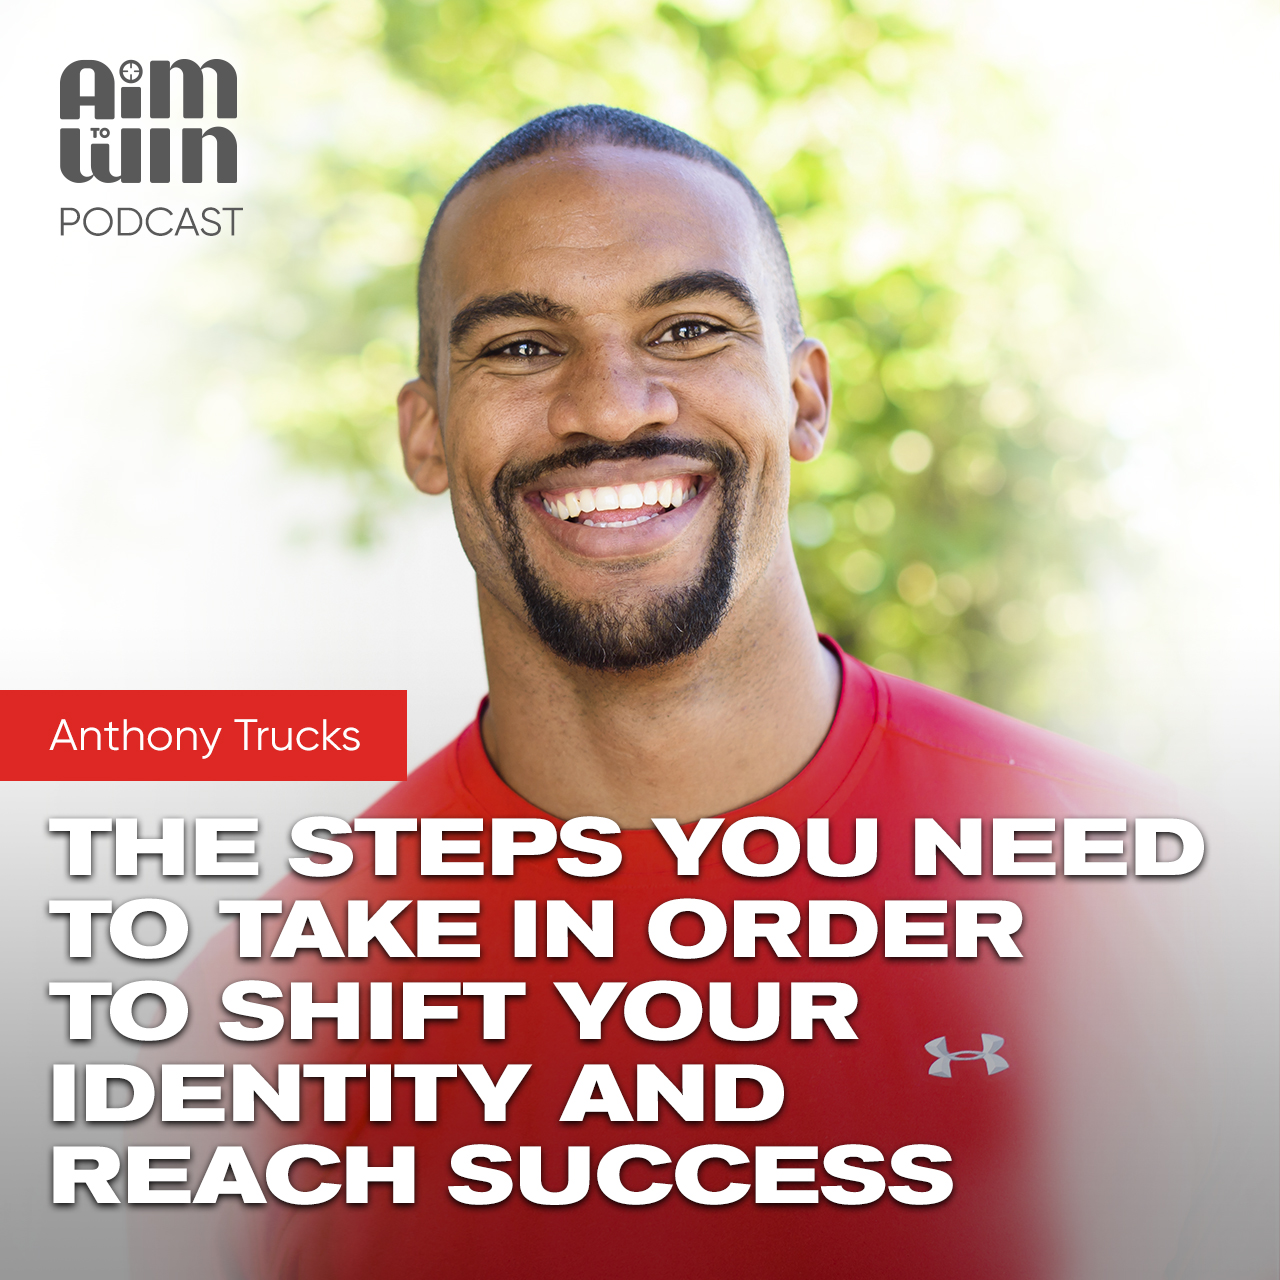 The Steps You Need To Take In Order To Shift Your Identity and Reach Success with Anthony Trucks